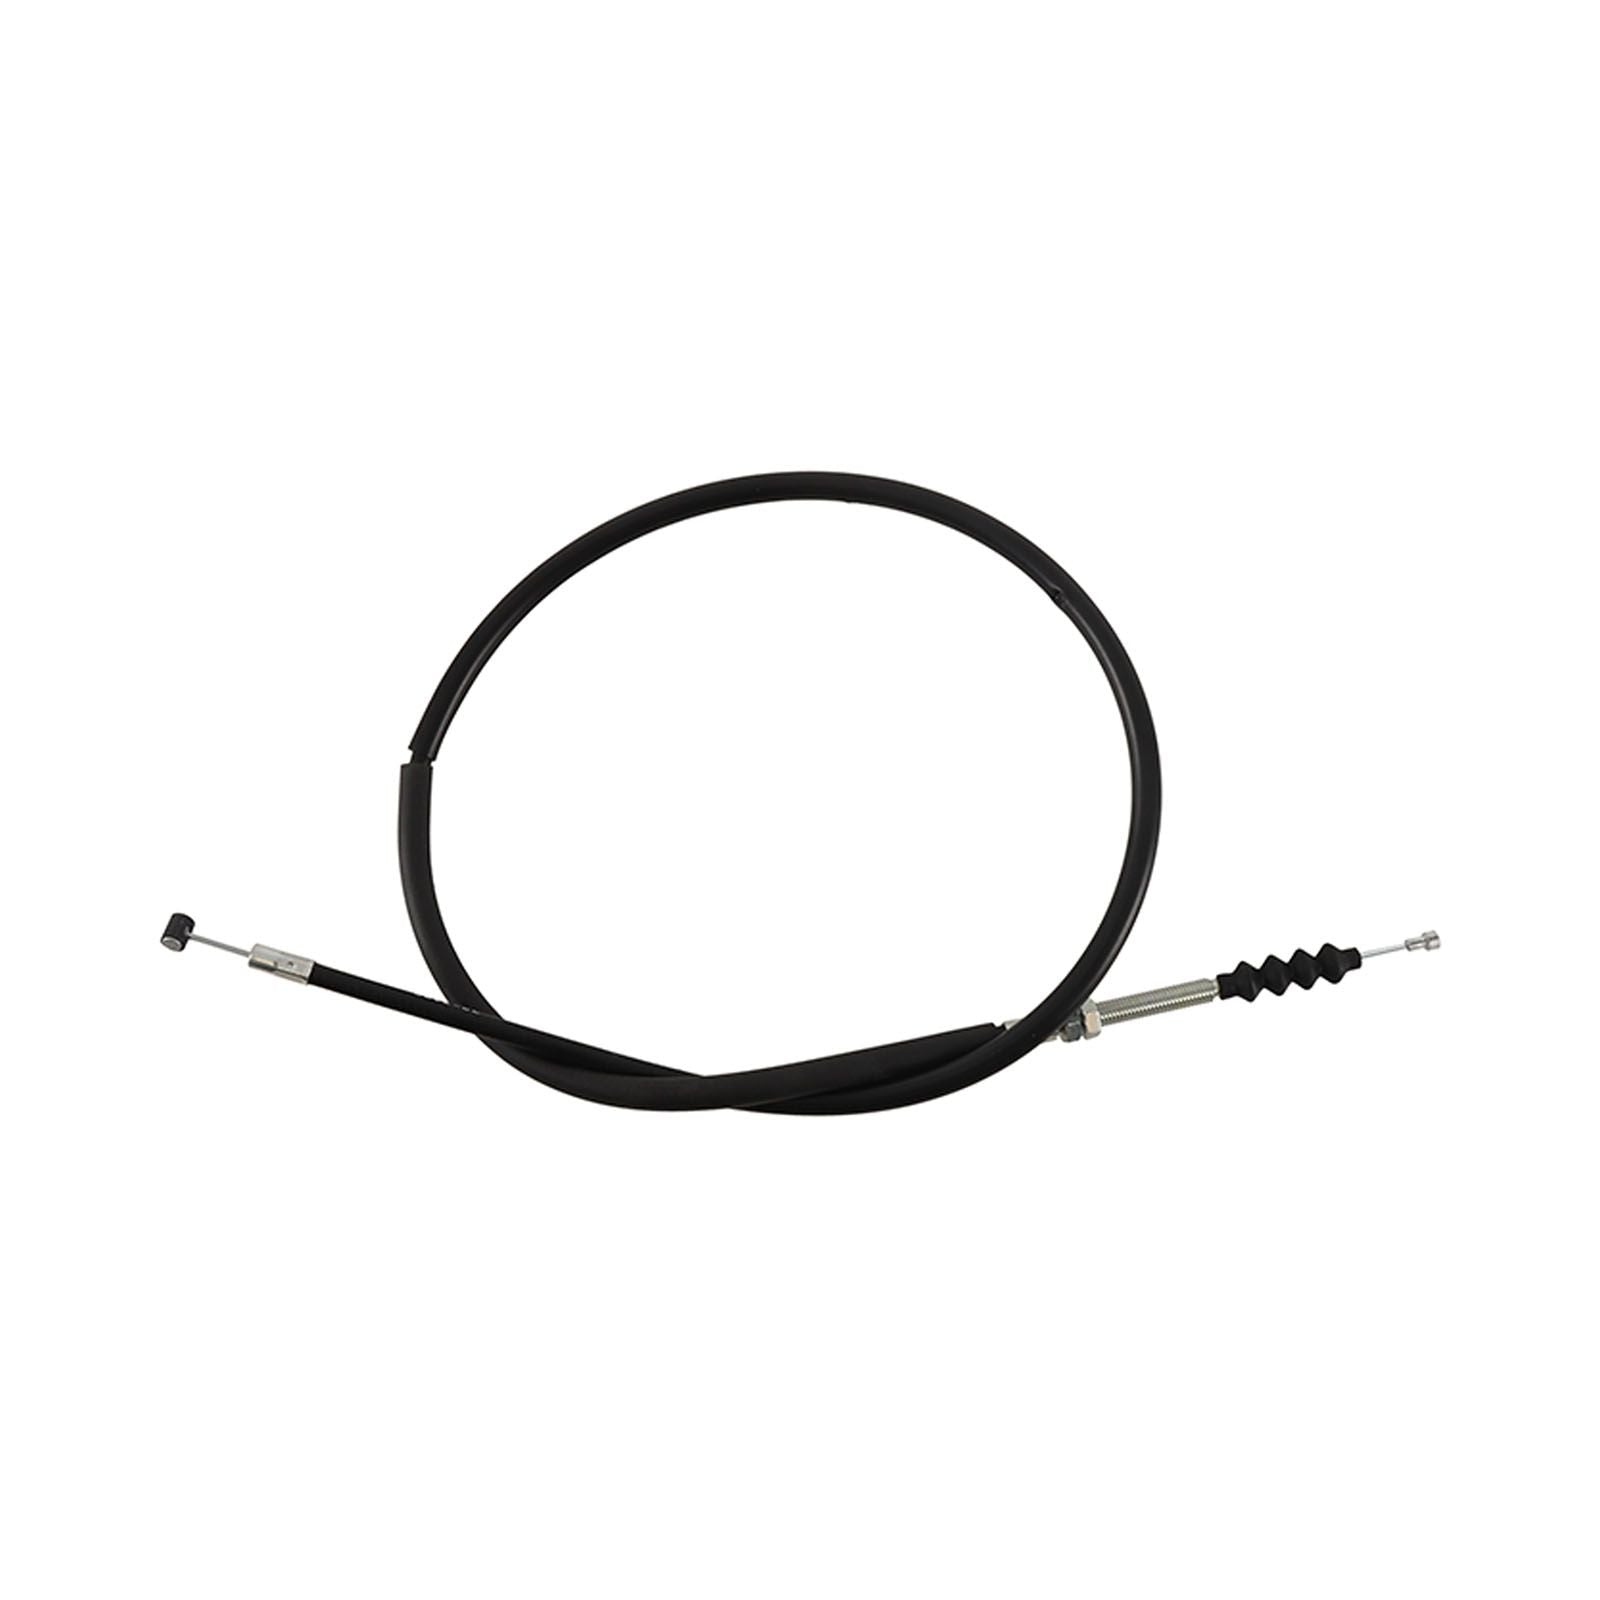 New ALL BALLS Racing Clutch Cable #AB452141